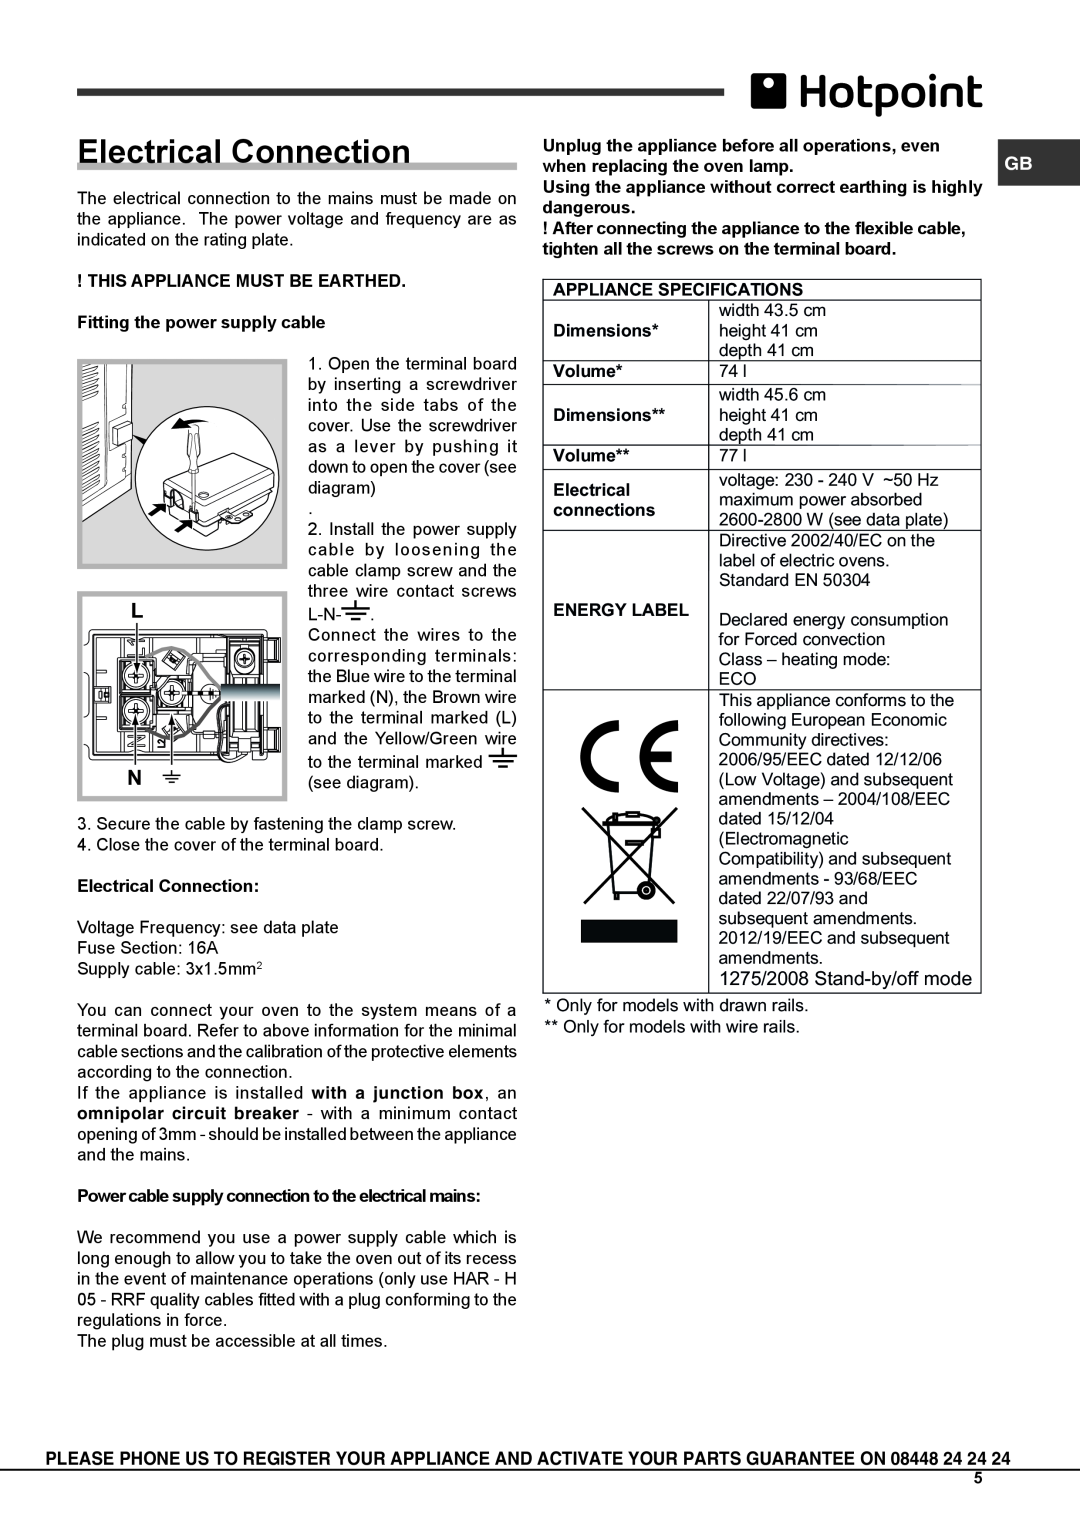 Hotpoint osx 1036s nd cx, osx 1036n dcx s manual Electrical Connection 